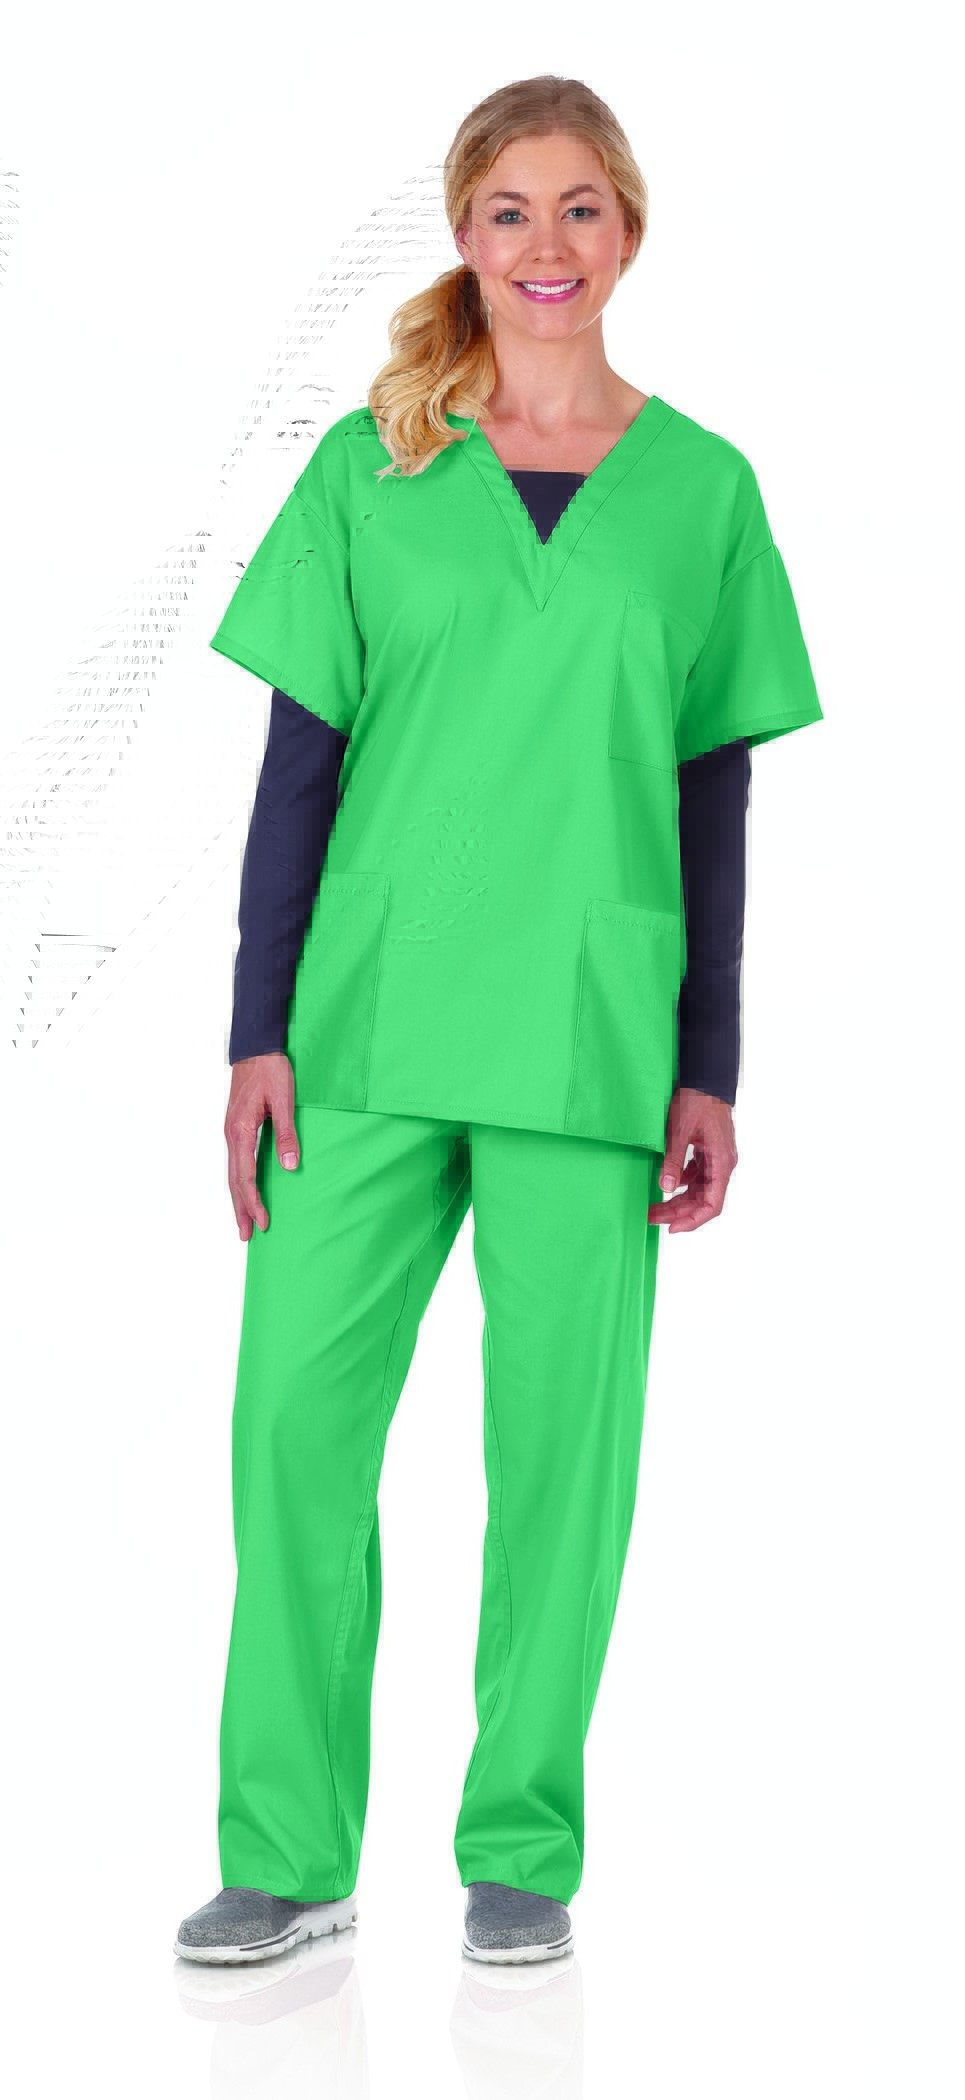 Encompass Group LLC Introduces Synergy Professional Apparel Long-Sleeve Scrub Top with Modesty Neck Panel